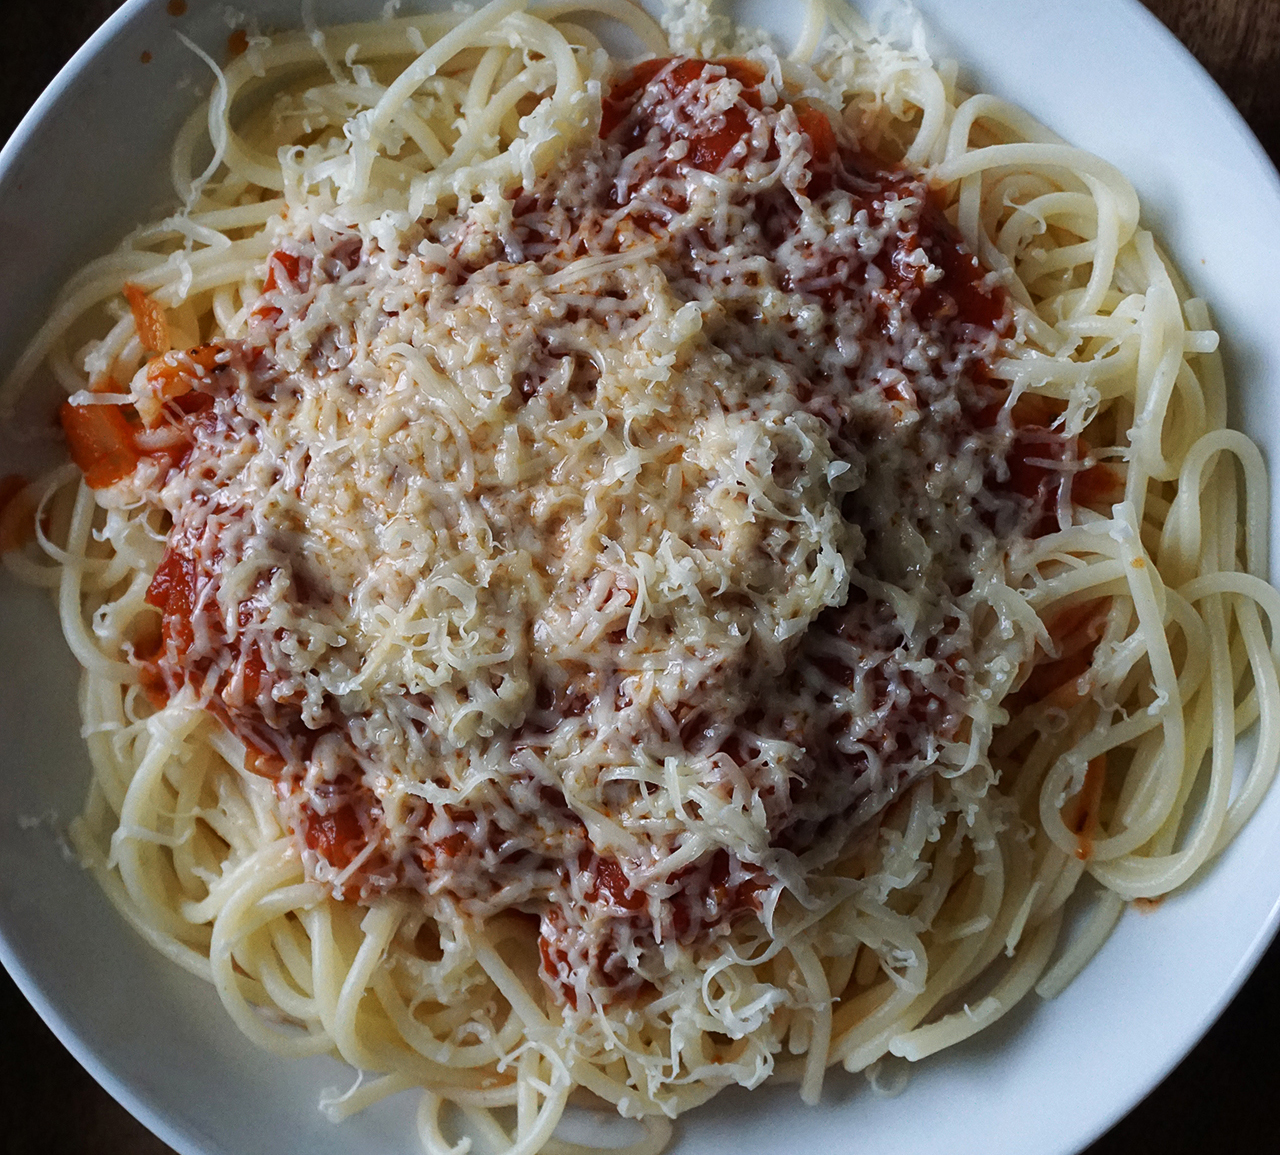 Gluten free spaghetti with basic tomato sauce and cheese